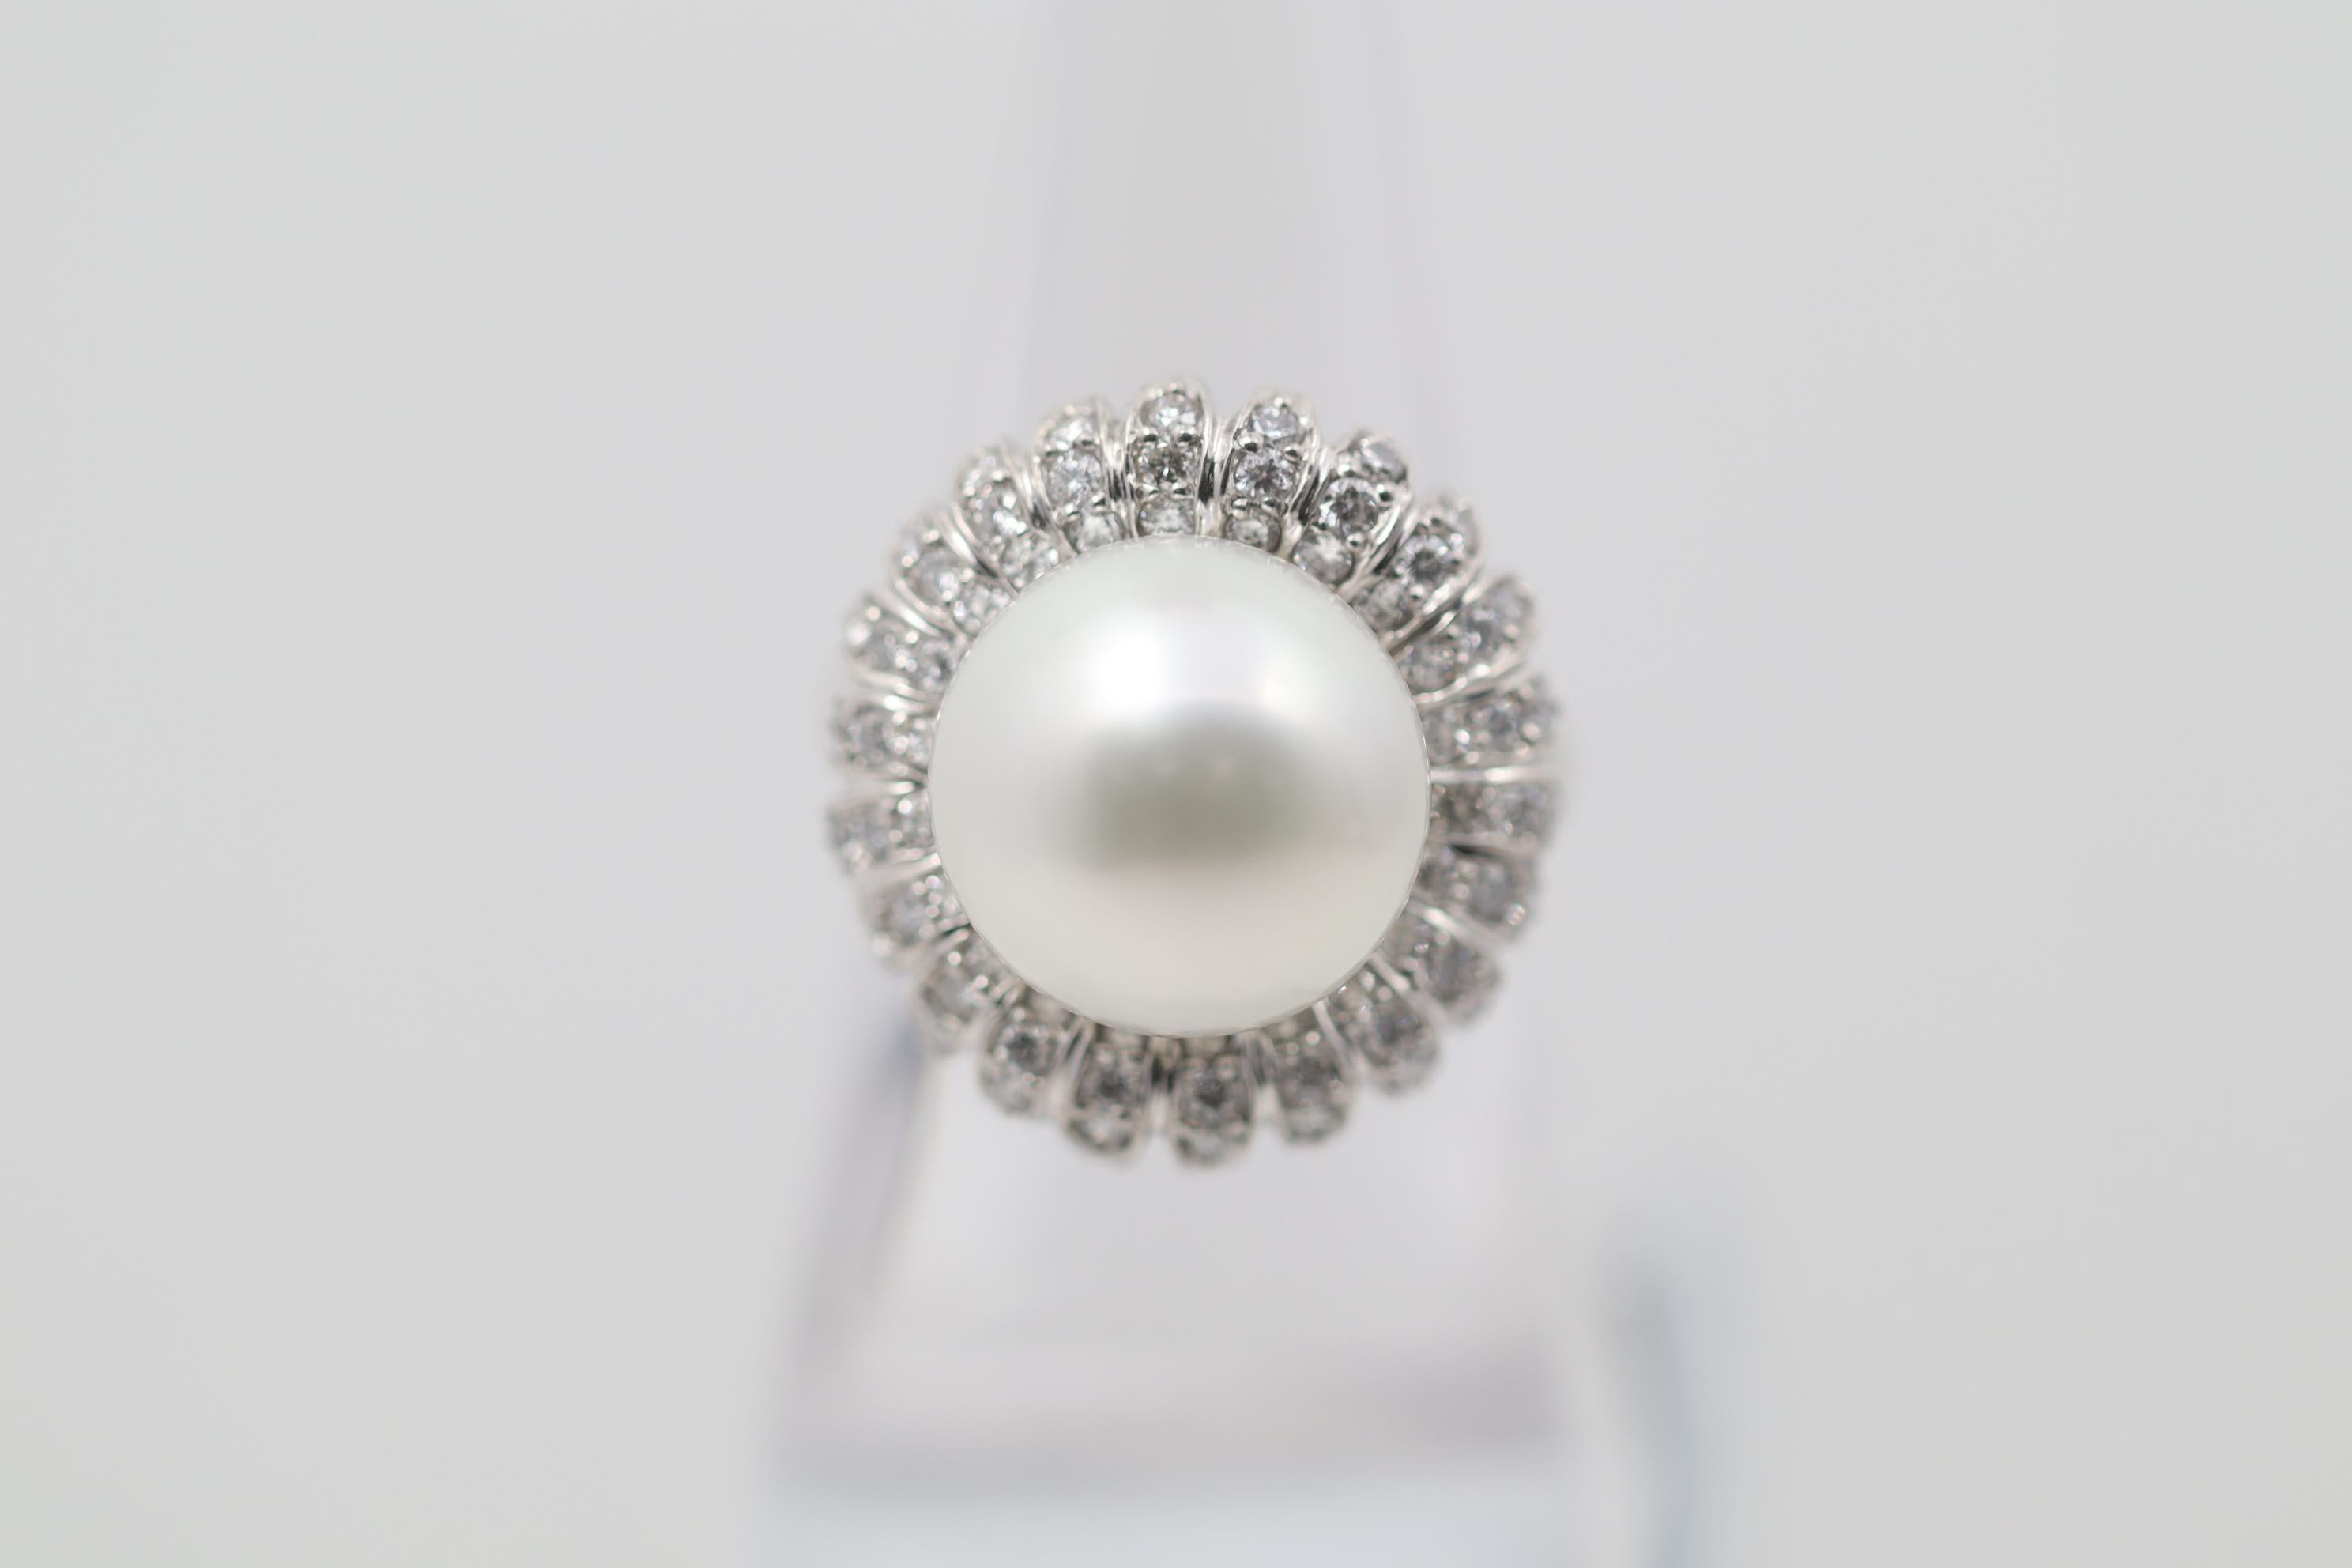 A lovely south sea pearl and diamond flower ring. The pearl measures 13mm and has great luster and is blemish free. It is accented by 0.86 carats of diamonds set around the pearl in a floral pattern. Hand-fabricated in platinum and ready to be